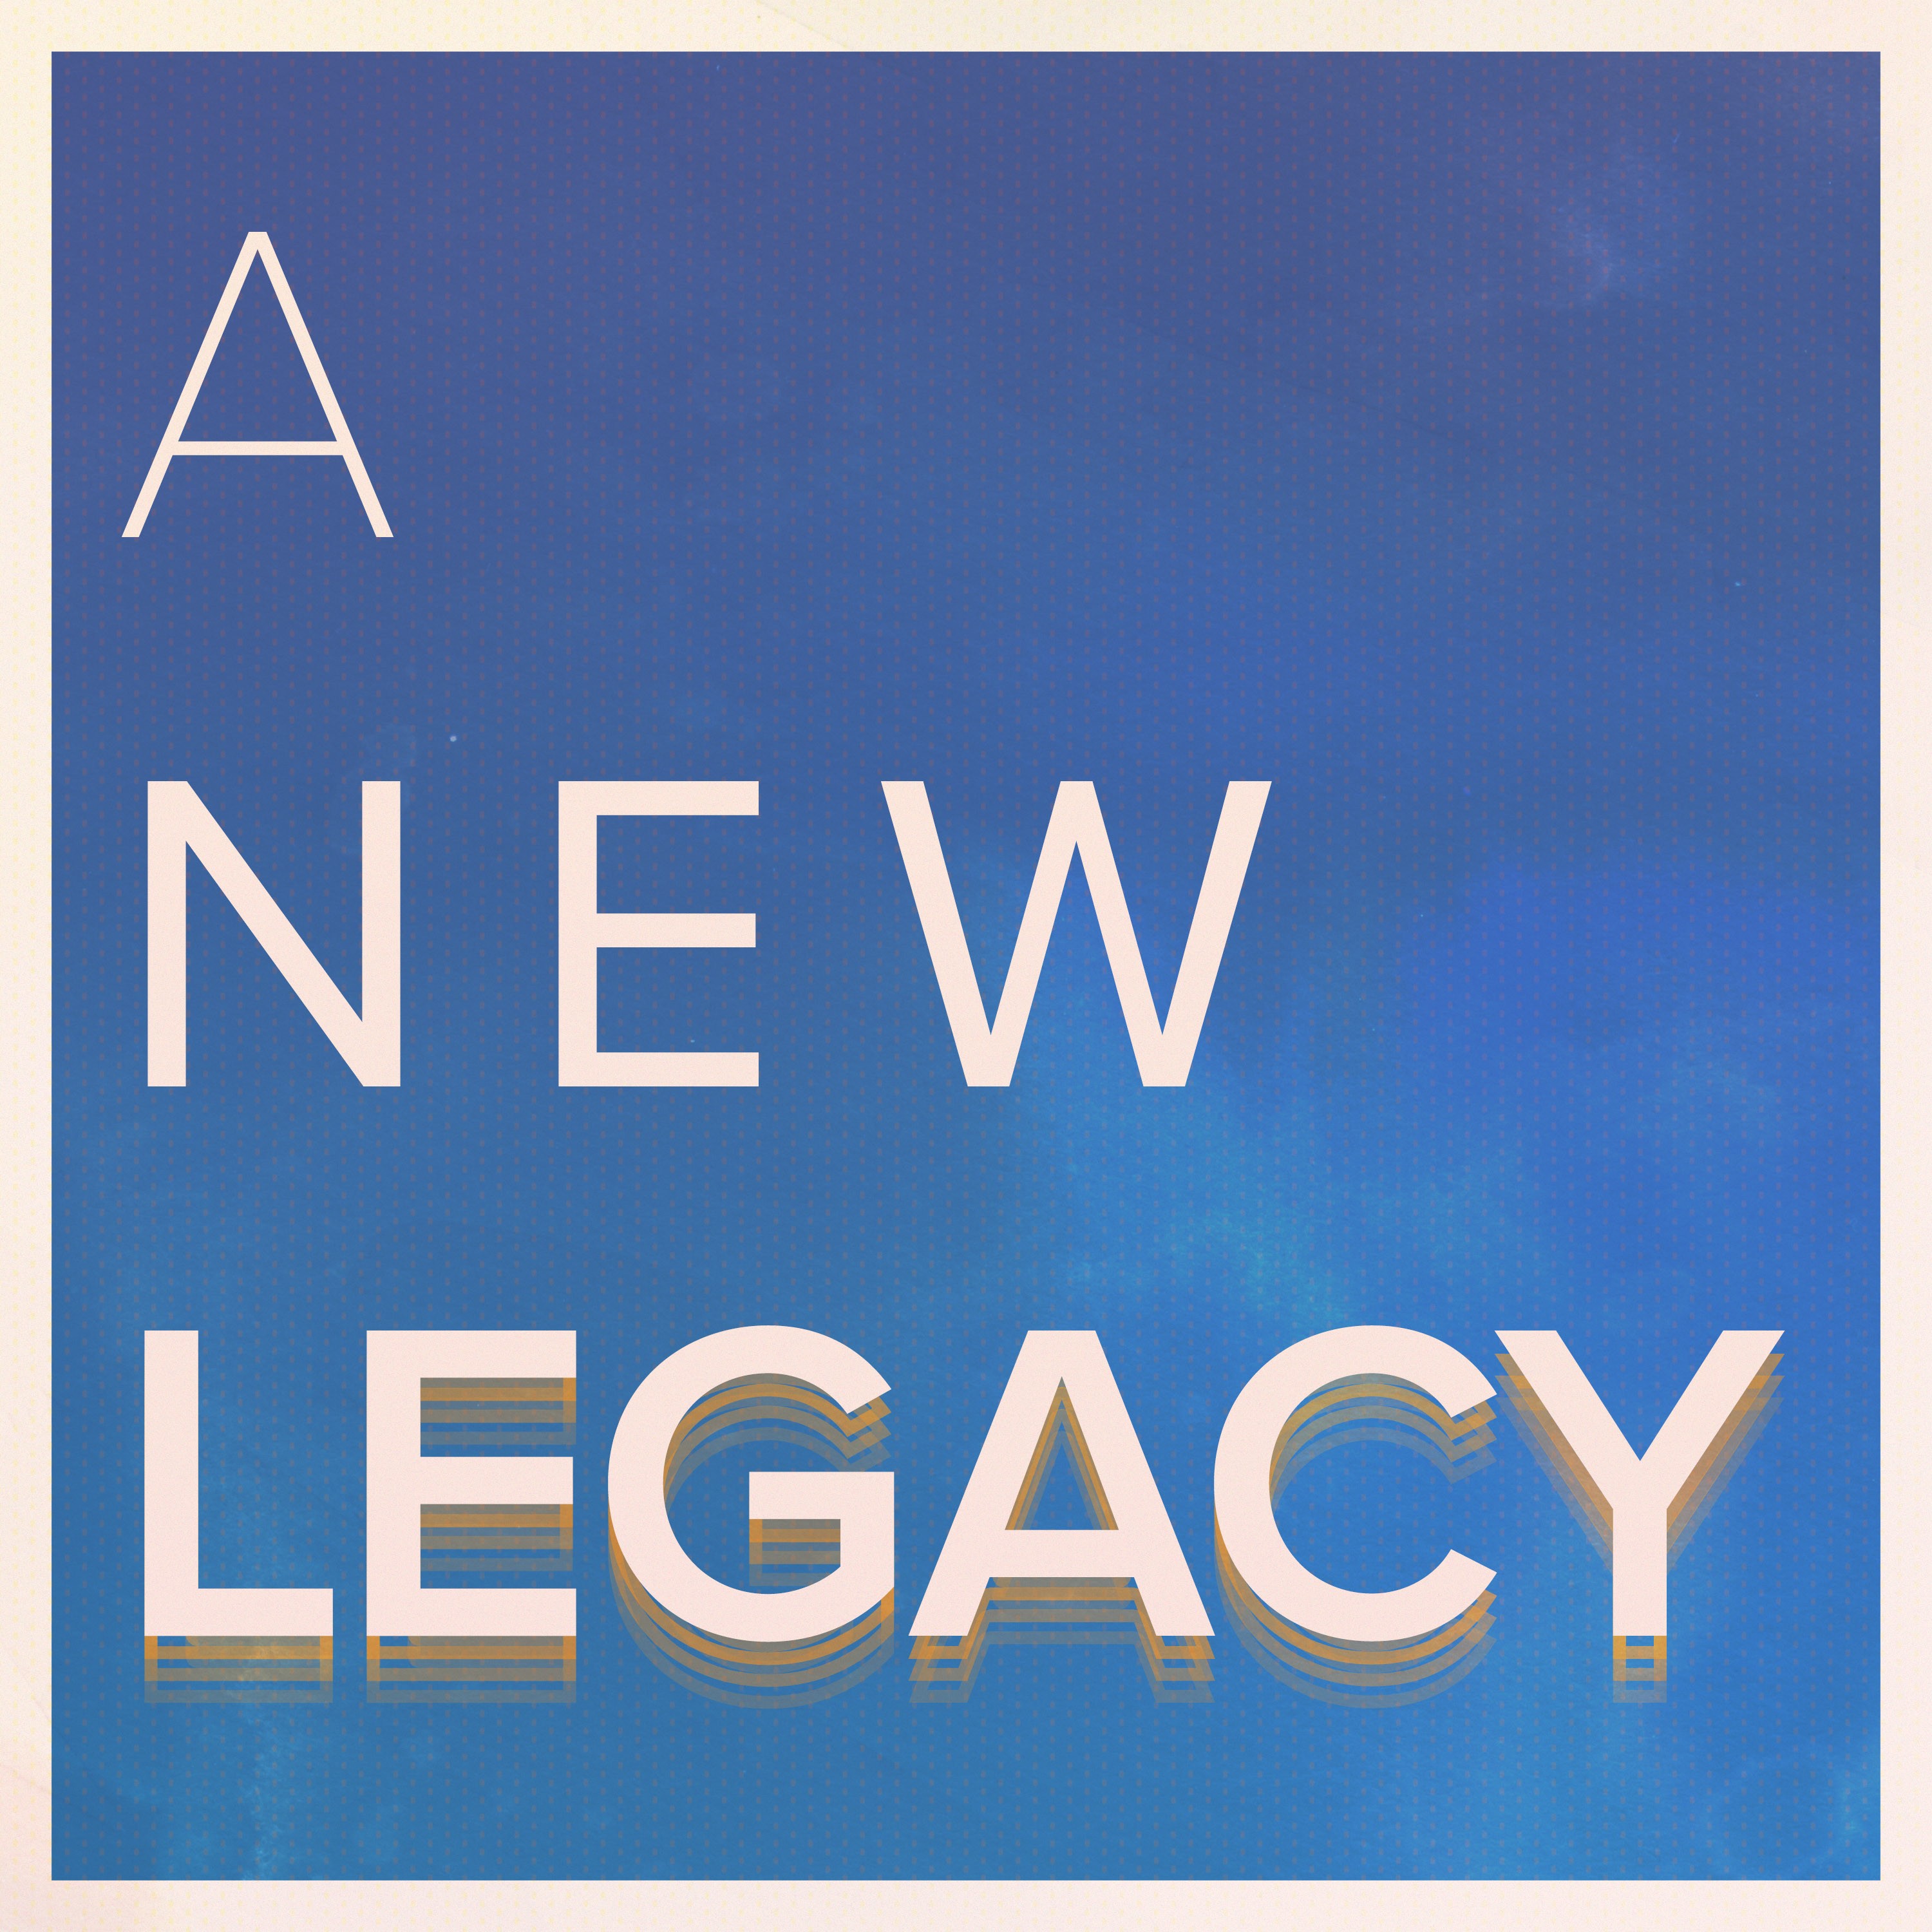 A New Legacy